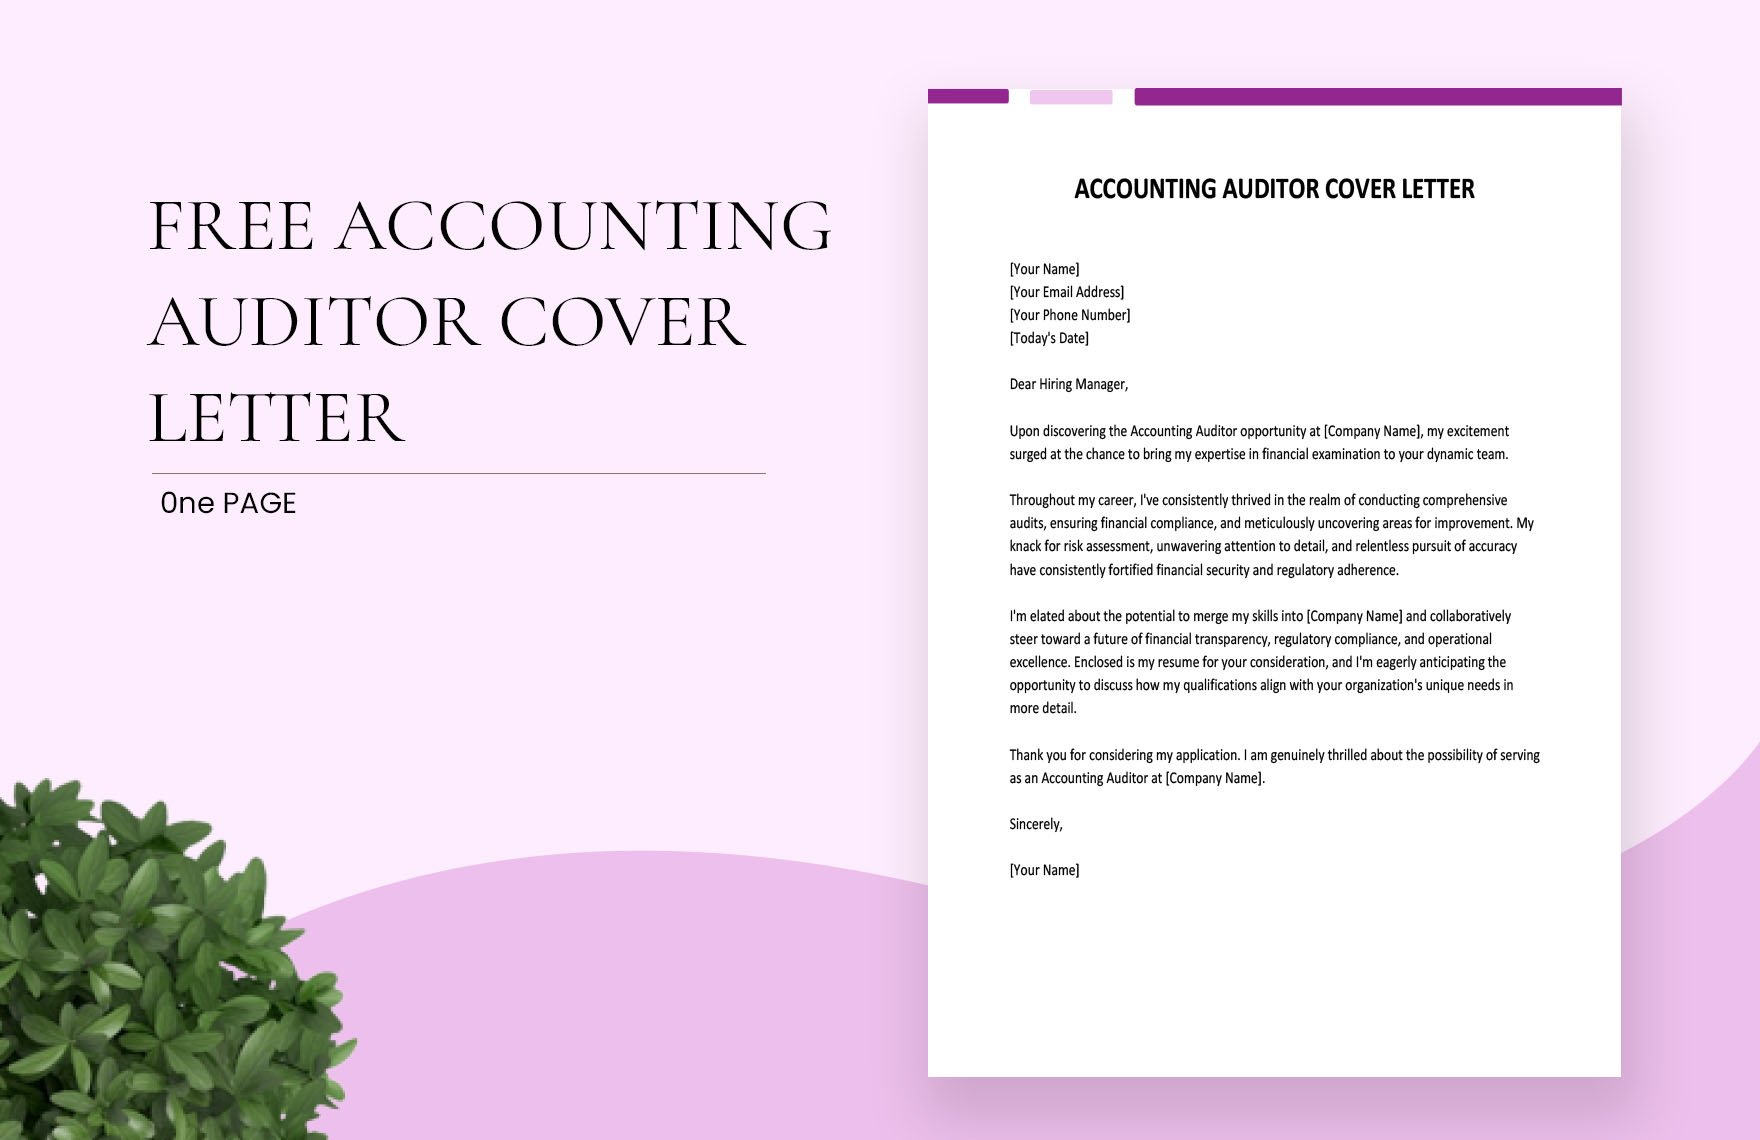 Accounting Auditor Cover Letter